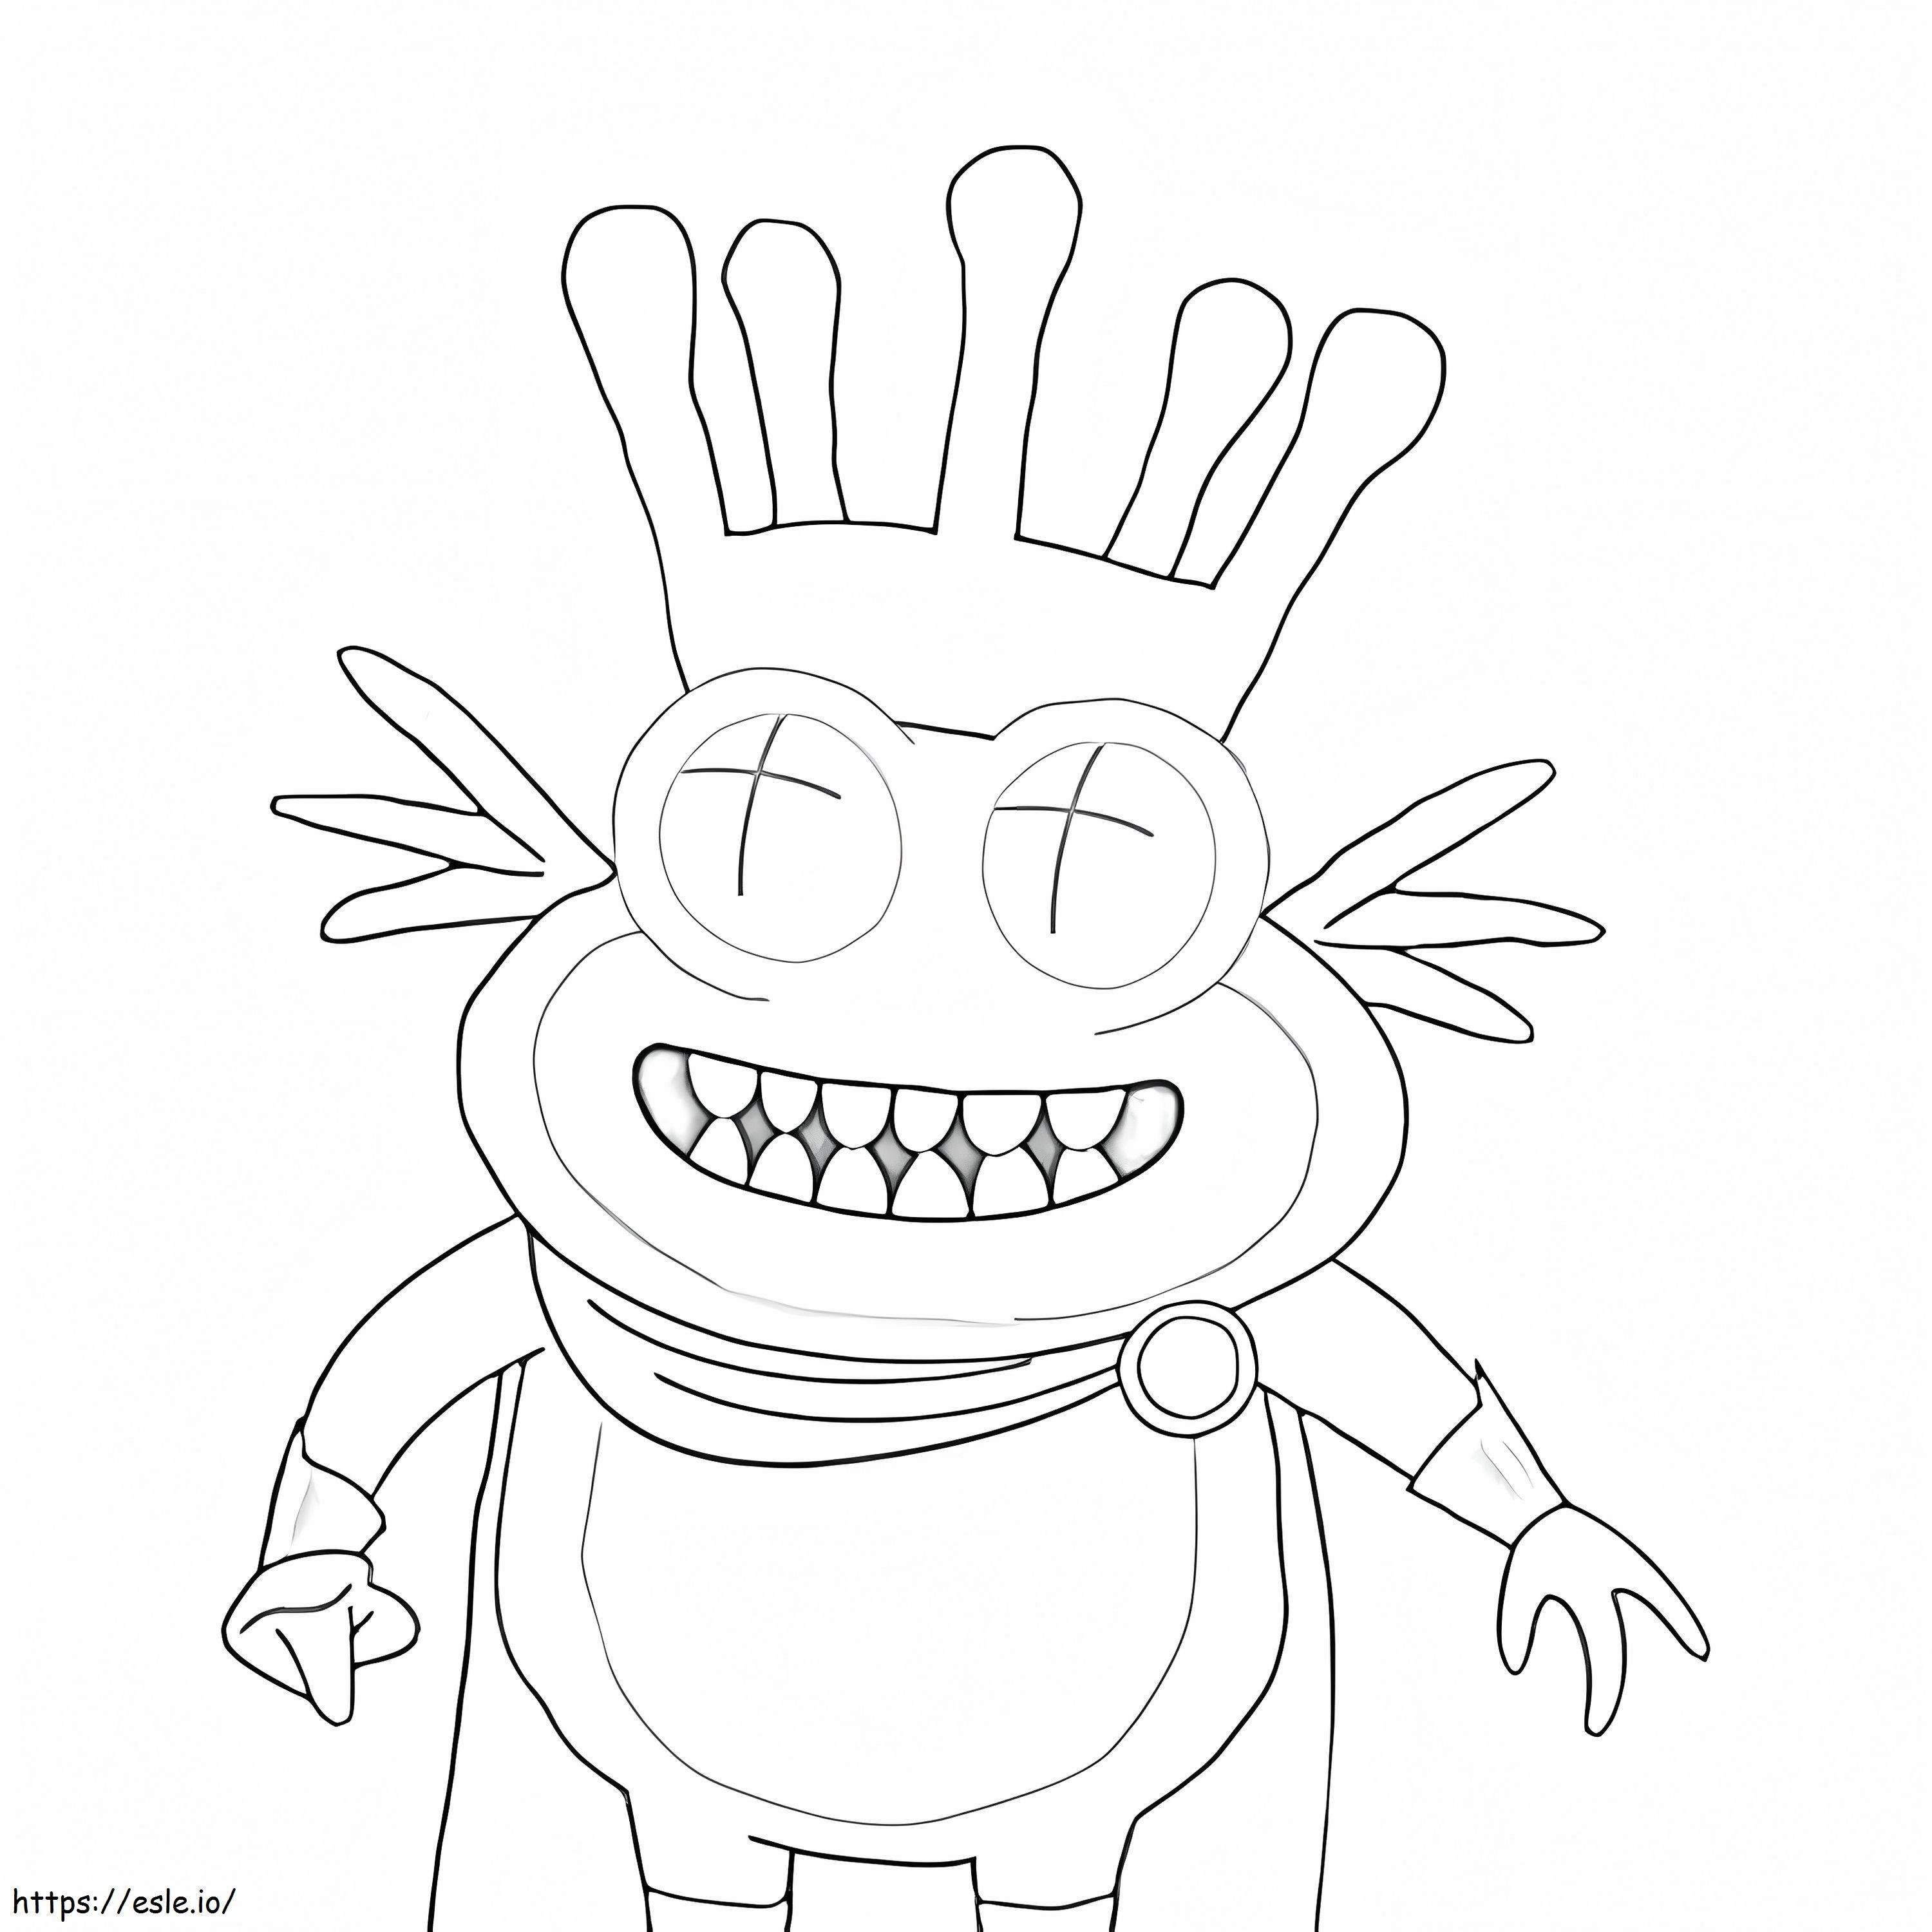 King Flippy Nips coloring page